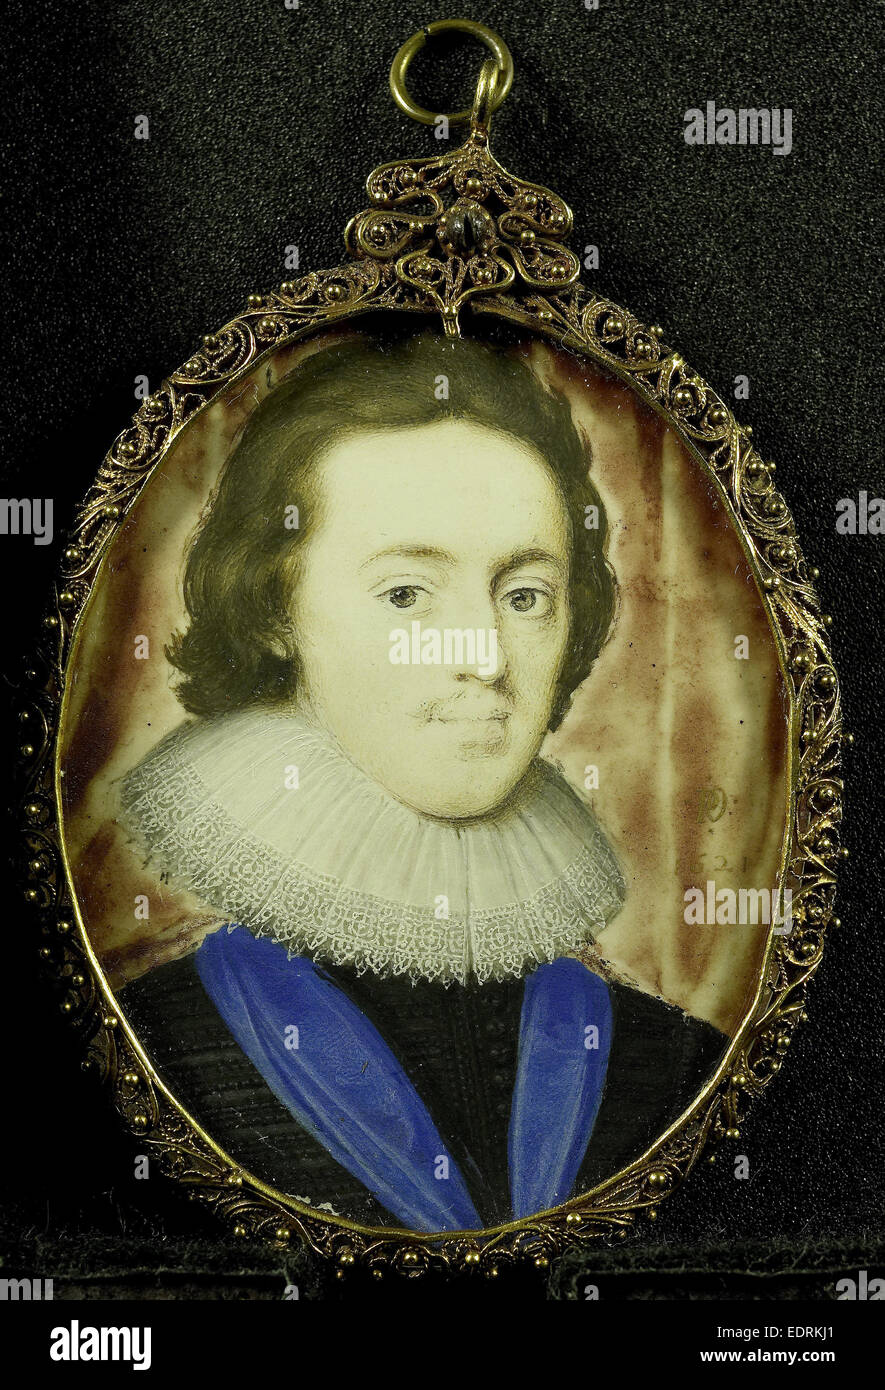 Karel Stuart, 1600-49, Prince of Wales. The later King Charles I of England, Peter Oliver, 1621, Portrait miniature Stock Photo